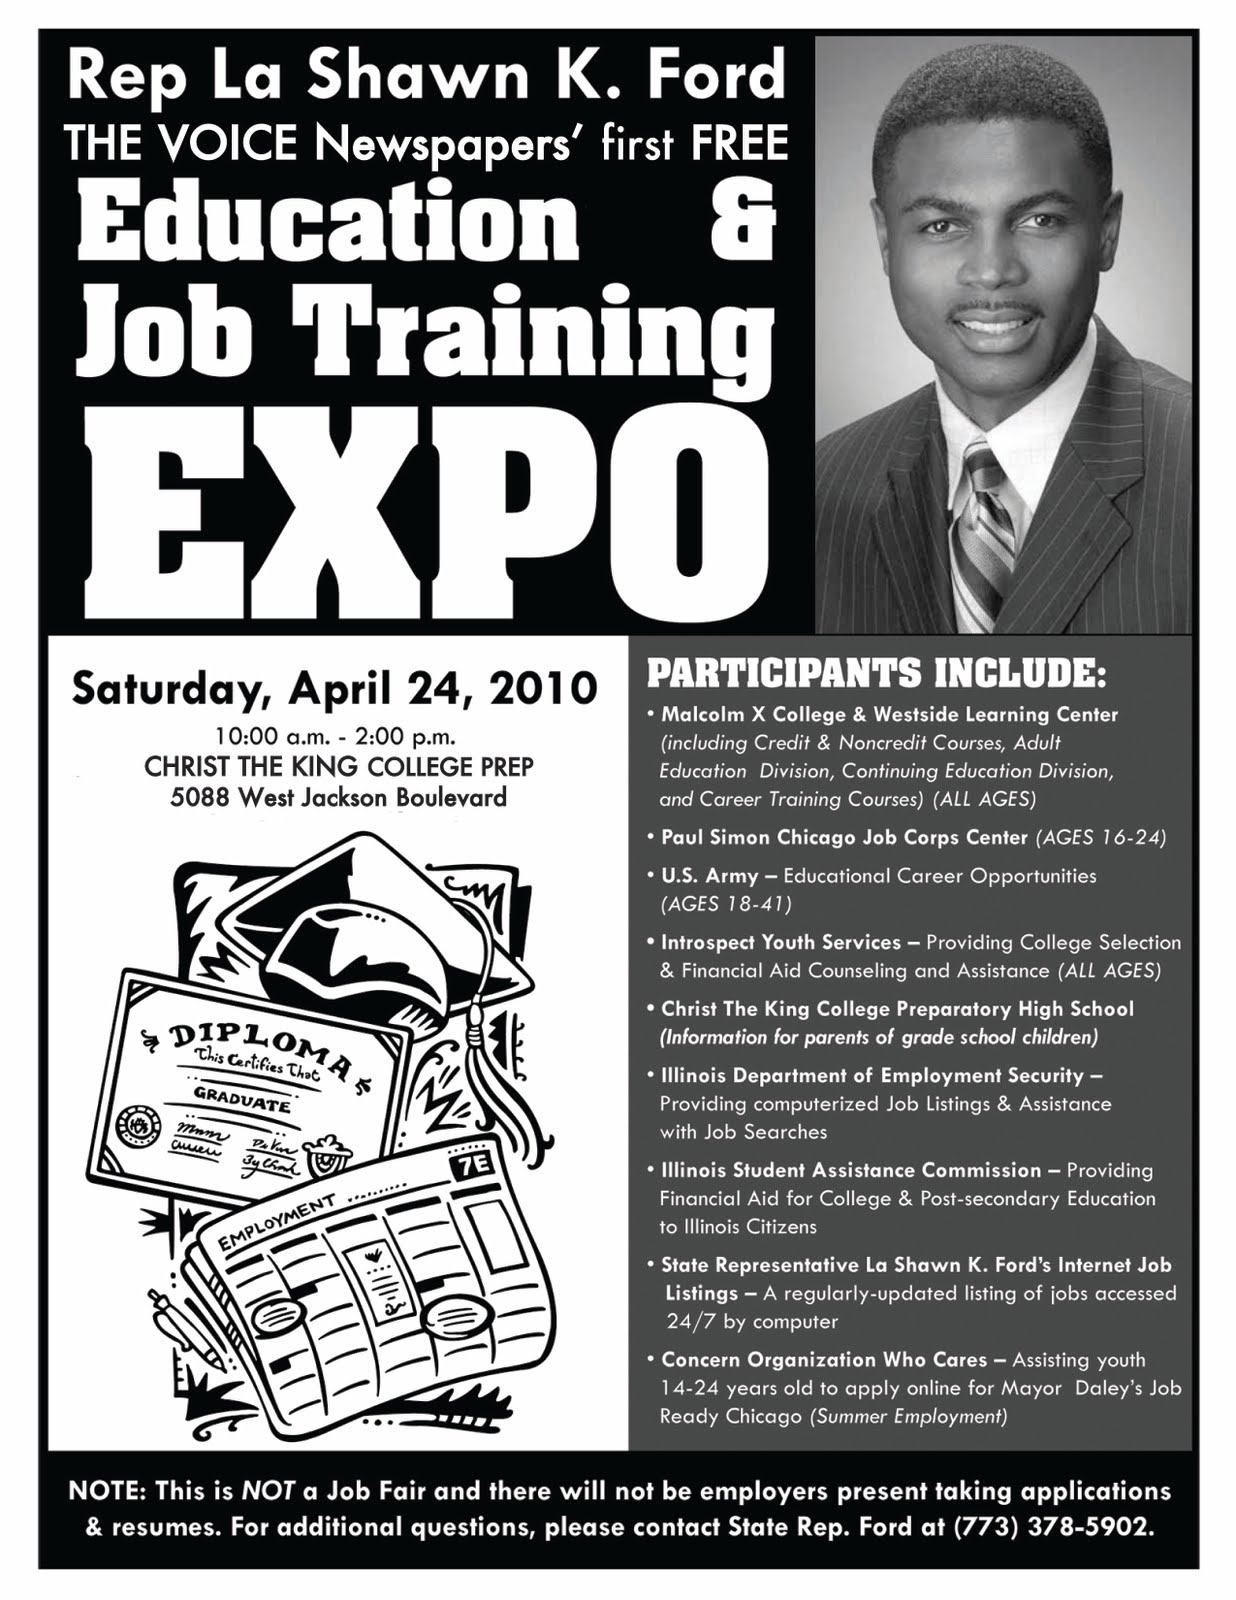 ... CAN SIGN UP FOR YOUTH READY CHICAGO SUMMER JOBS AT APRIL 24 EXPO